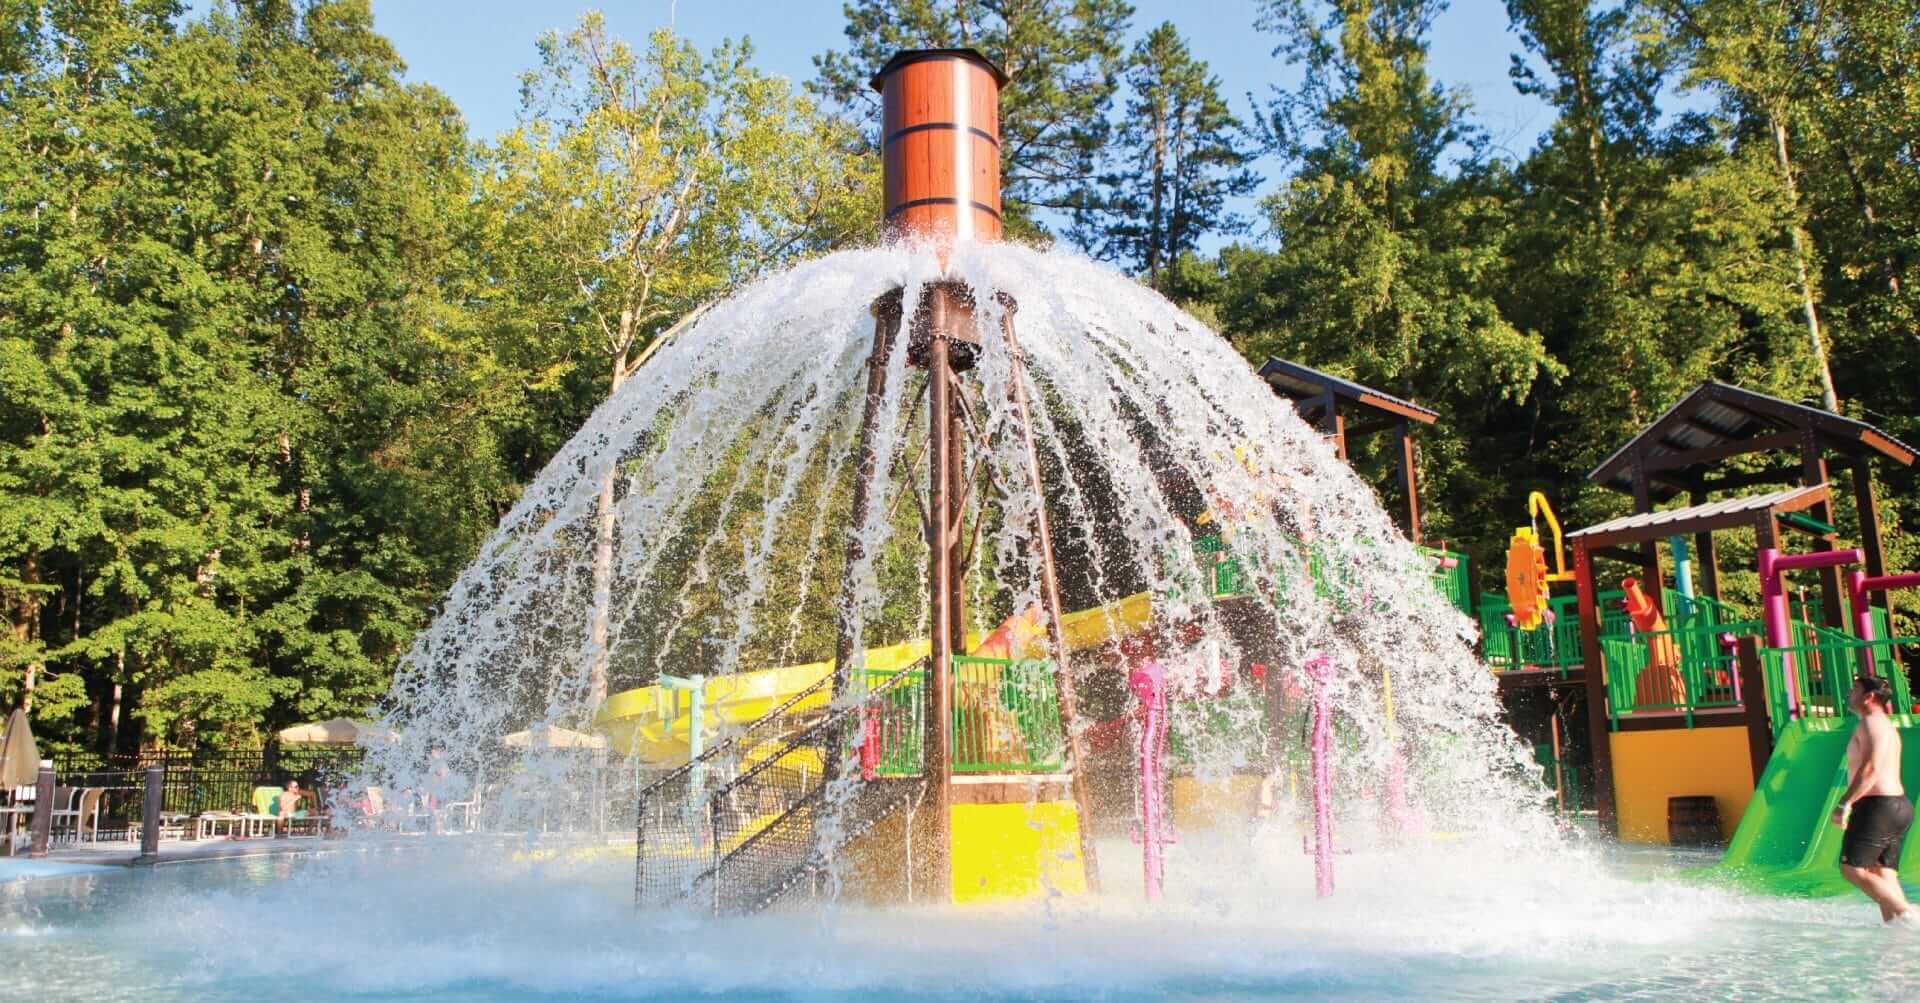 The Power Plunge water feature releases a large volume of water in a 360 degree spray pattern at the Jellystone Golden Valley RV Resort in North Carolina.